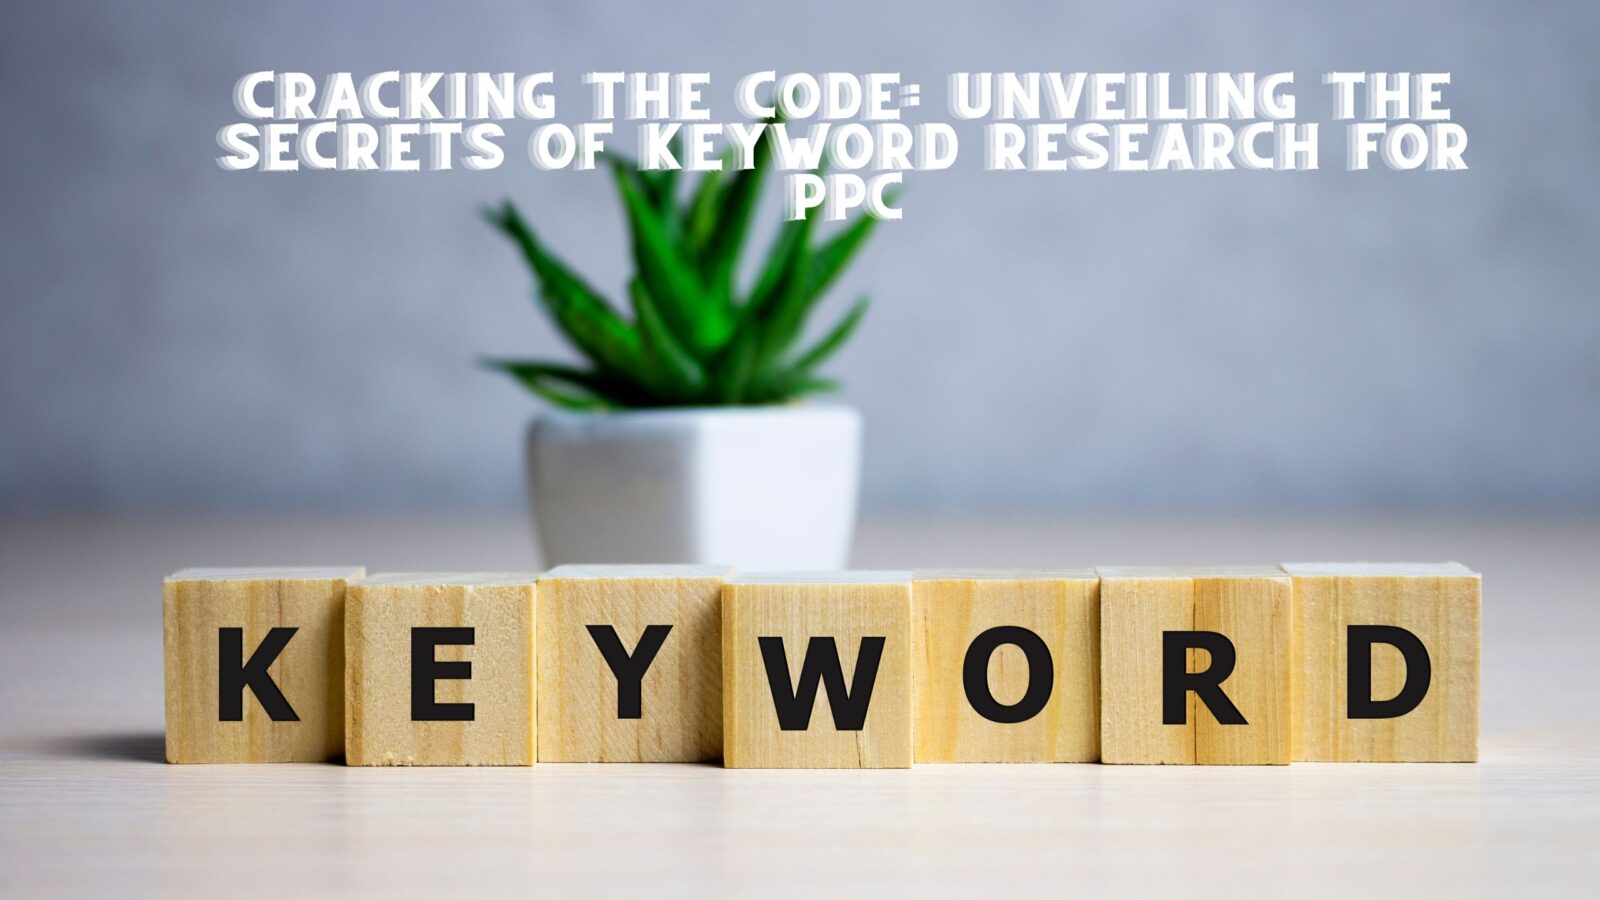 Cracking the Code: Unveiling the Secrets of Keyword Research for PPC